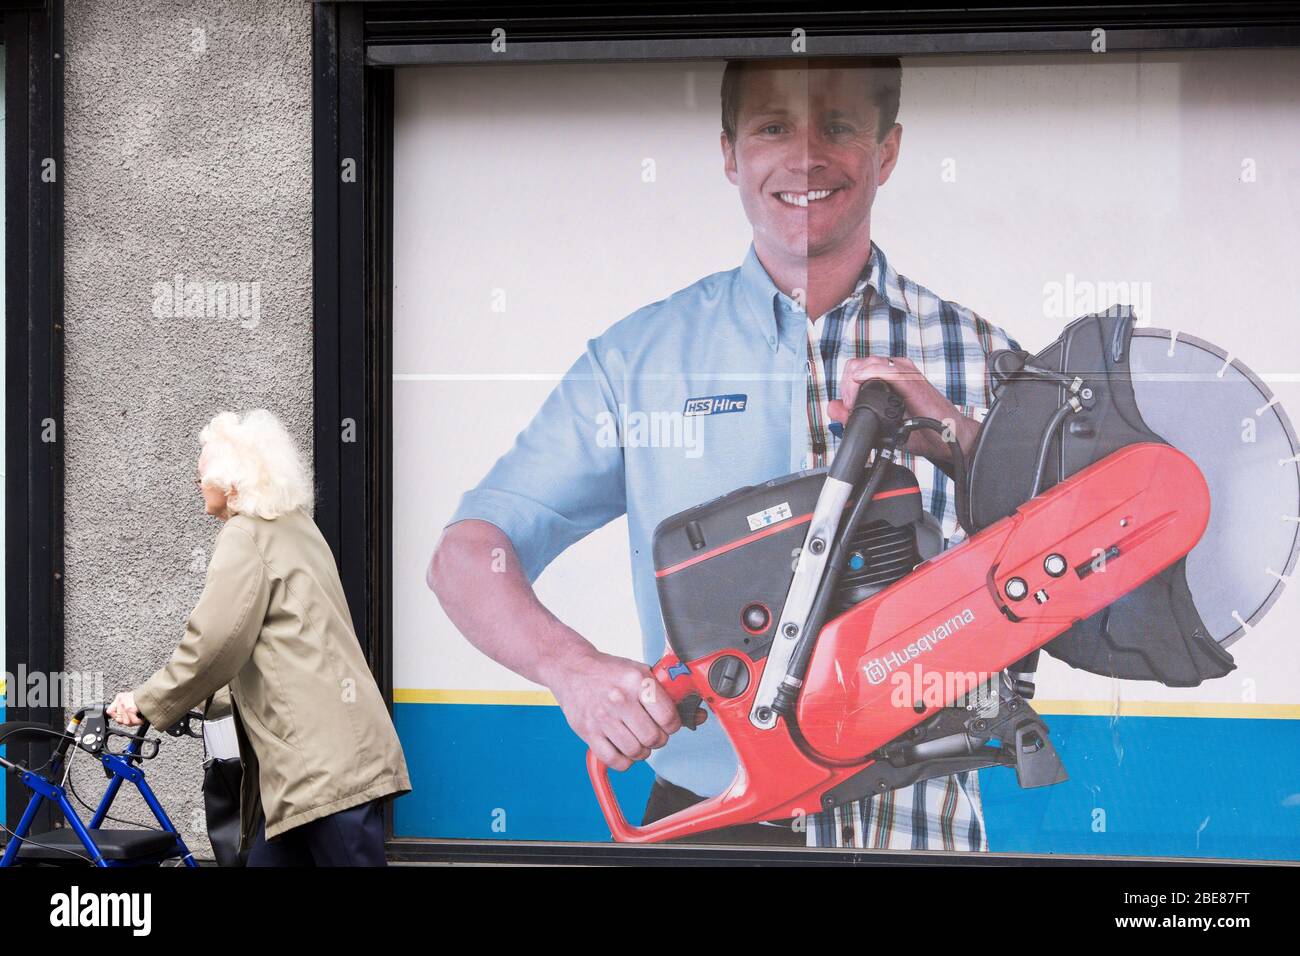 An elderly woman using a walking frame walks past a billboard for a tool hire company while walking up Picton Road in Urban Liverpool Stock Photo